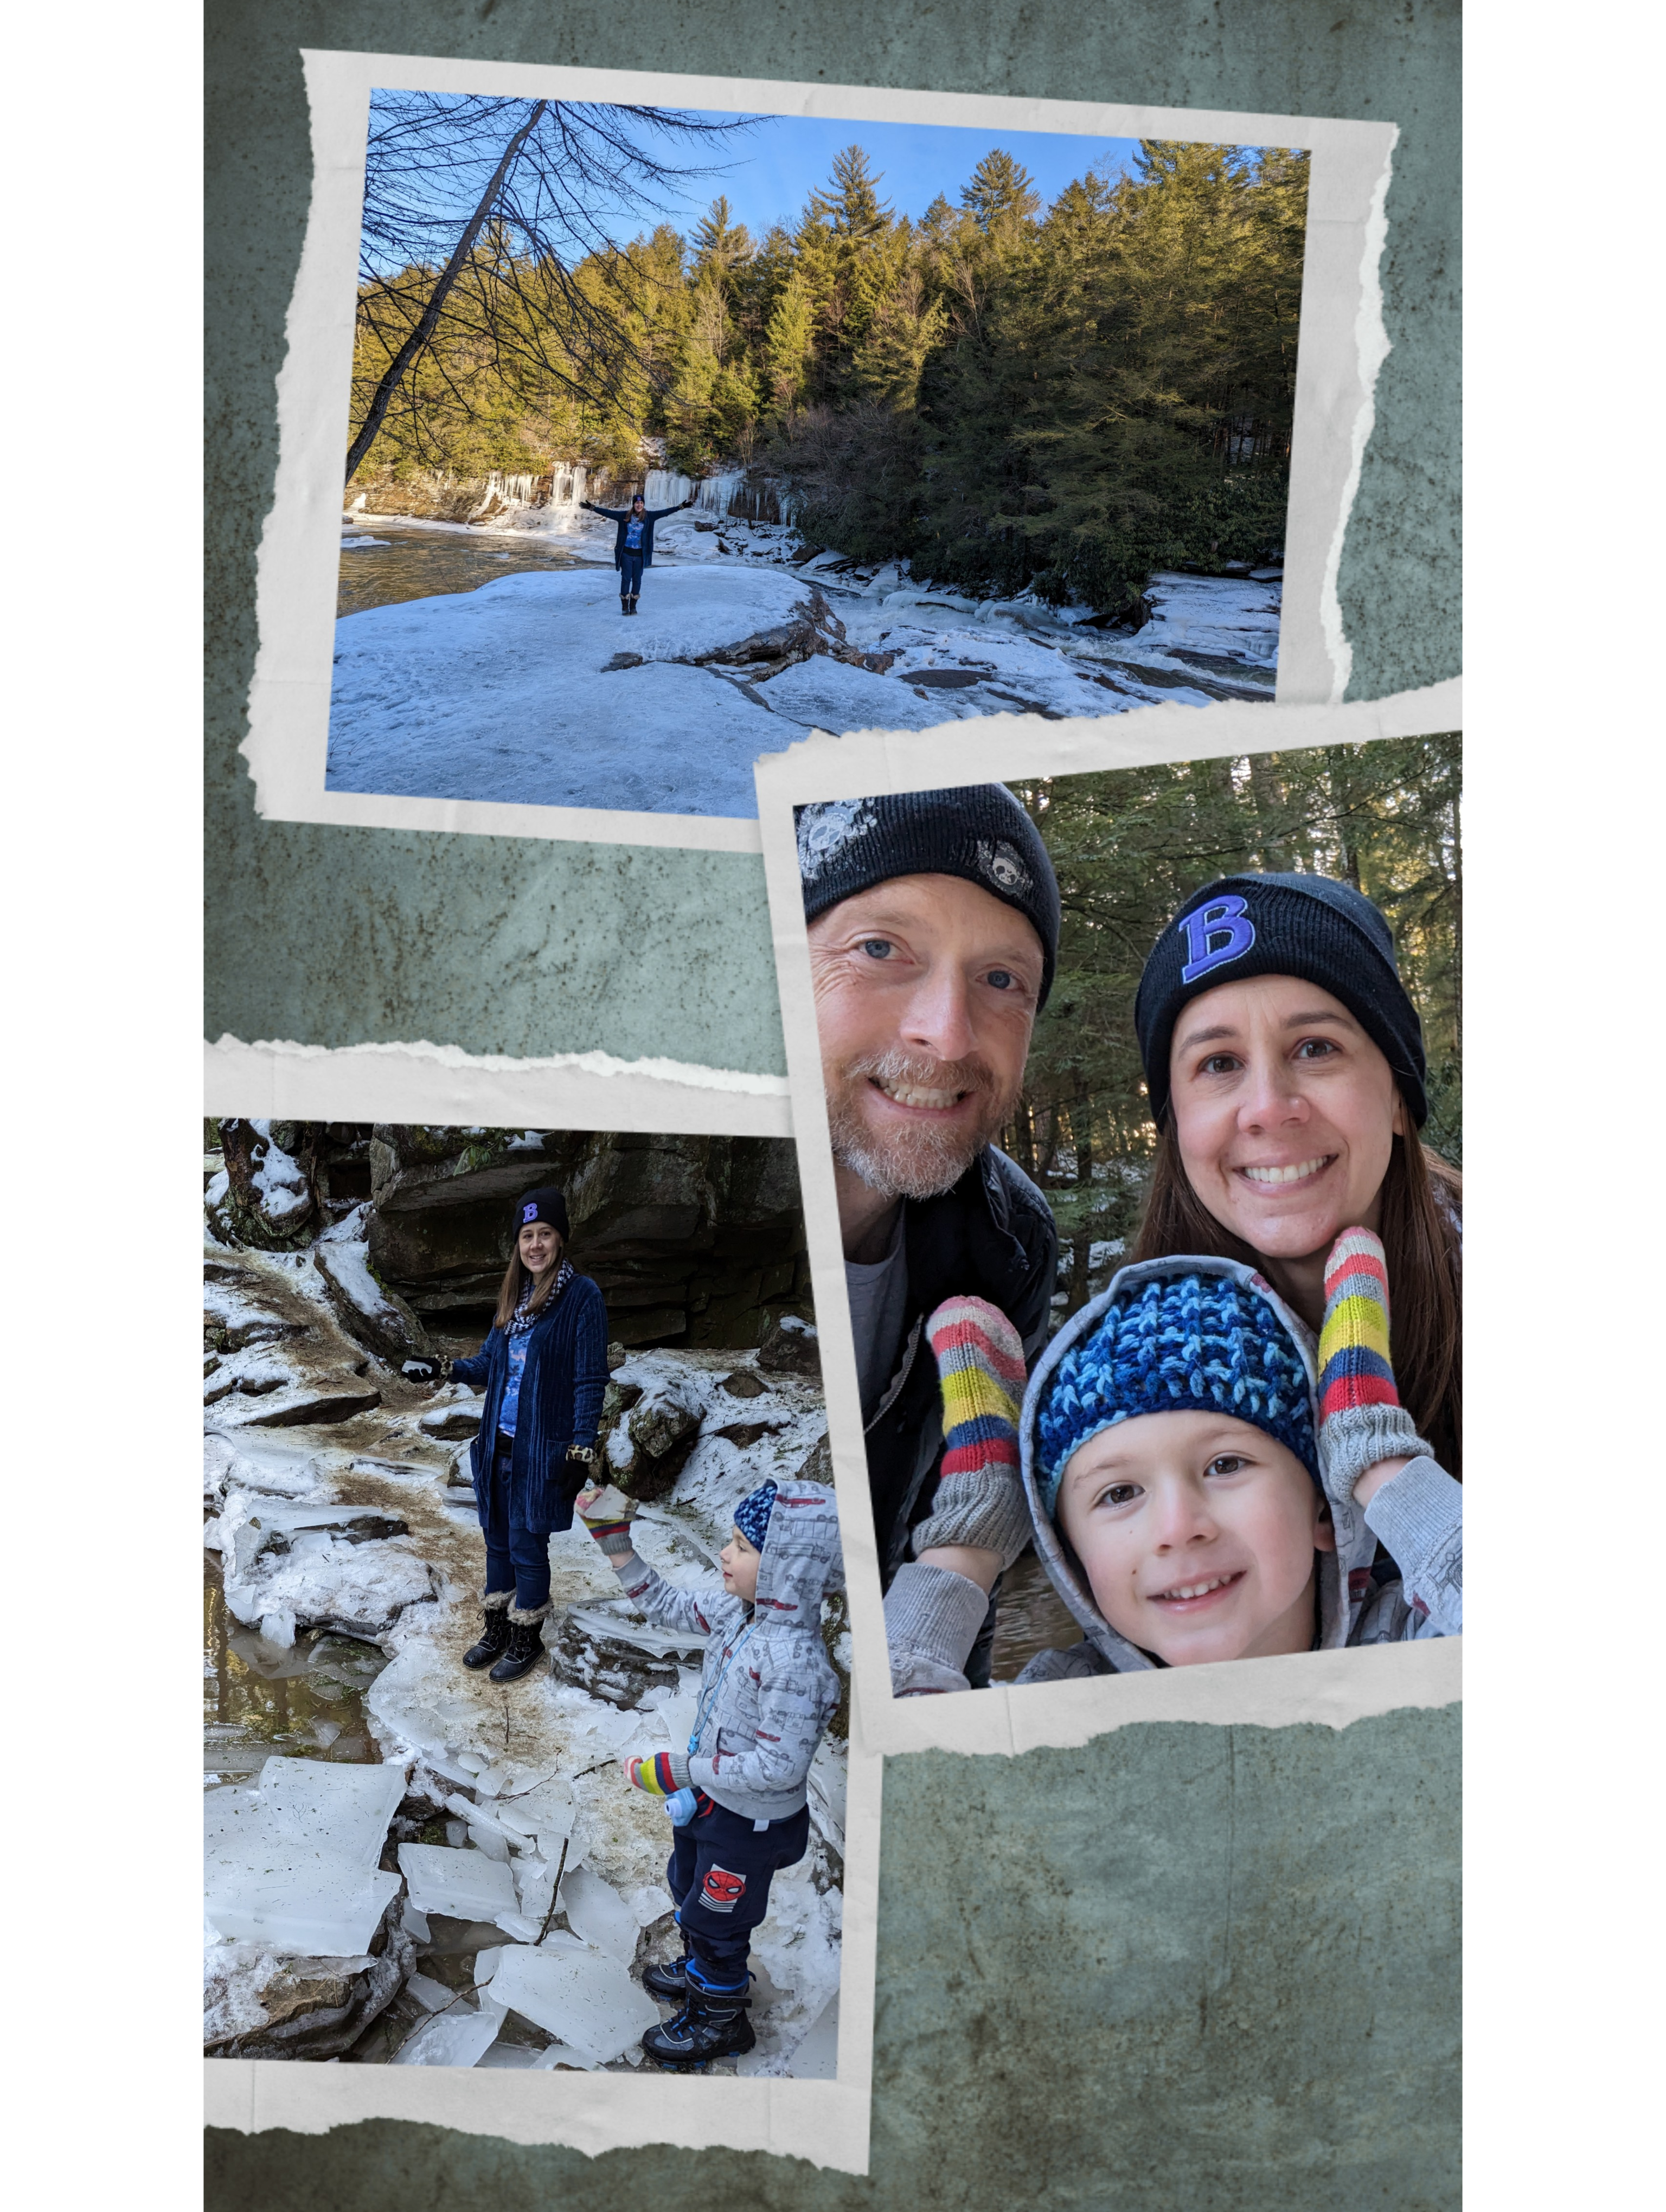 A collage of three photos. Top photo is a woman standing on a snow covered, rocky outcropping with icicle covered cliffs in the background. The middle photo is a woman, man, and child posing for a selfie with winter gear on. The third is a woman and child standing next to an icy creek about to throw ice chunks in.